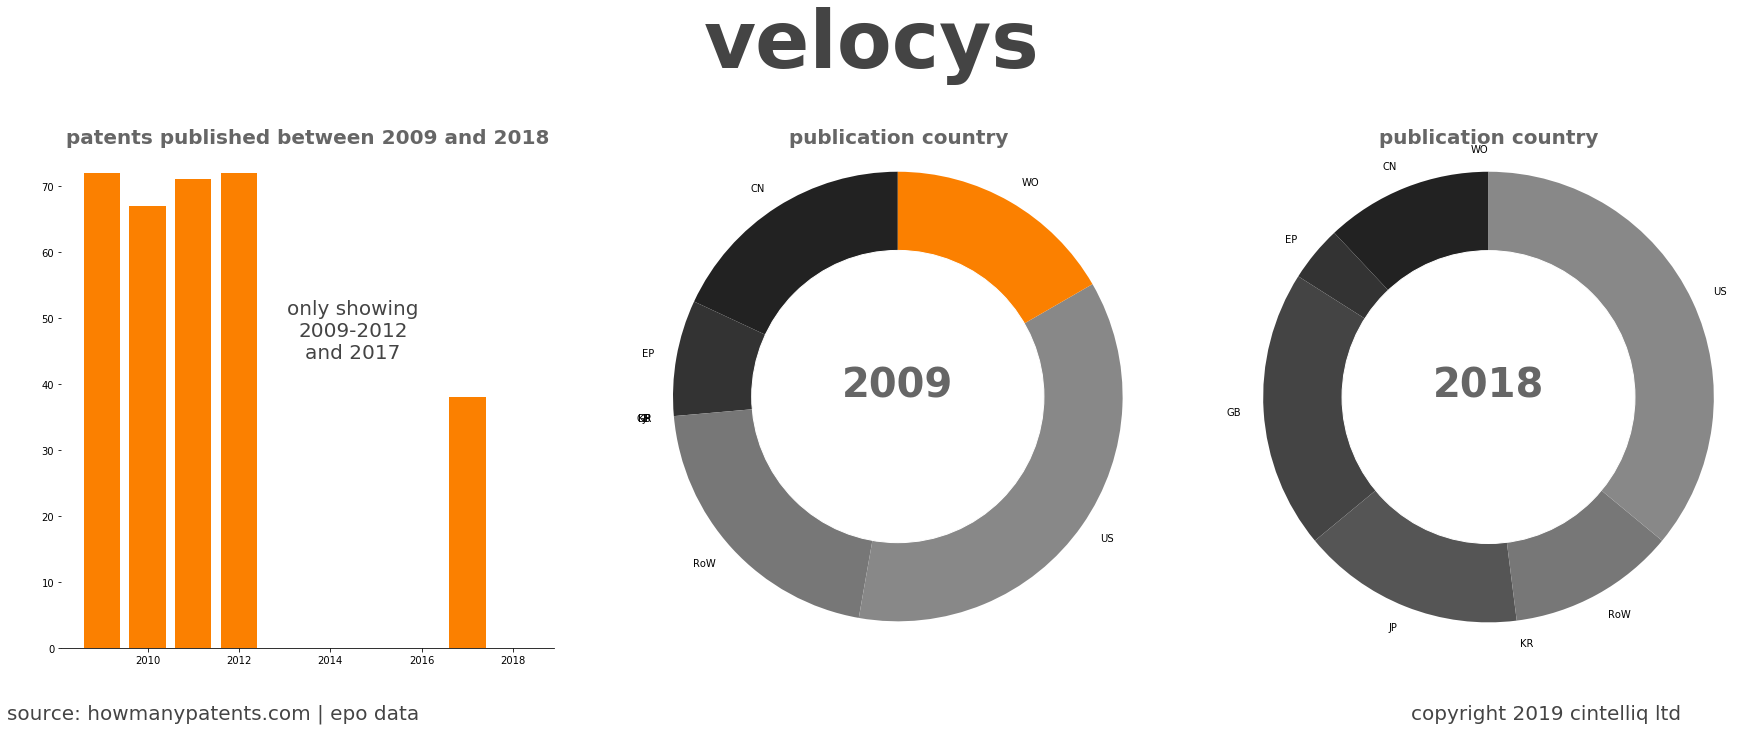 summary of patents for Velocys